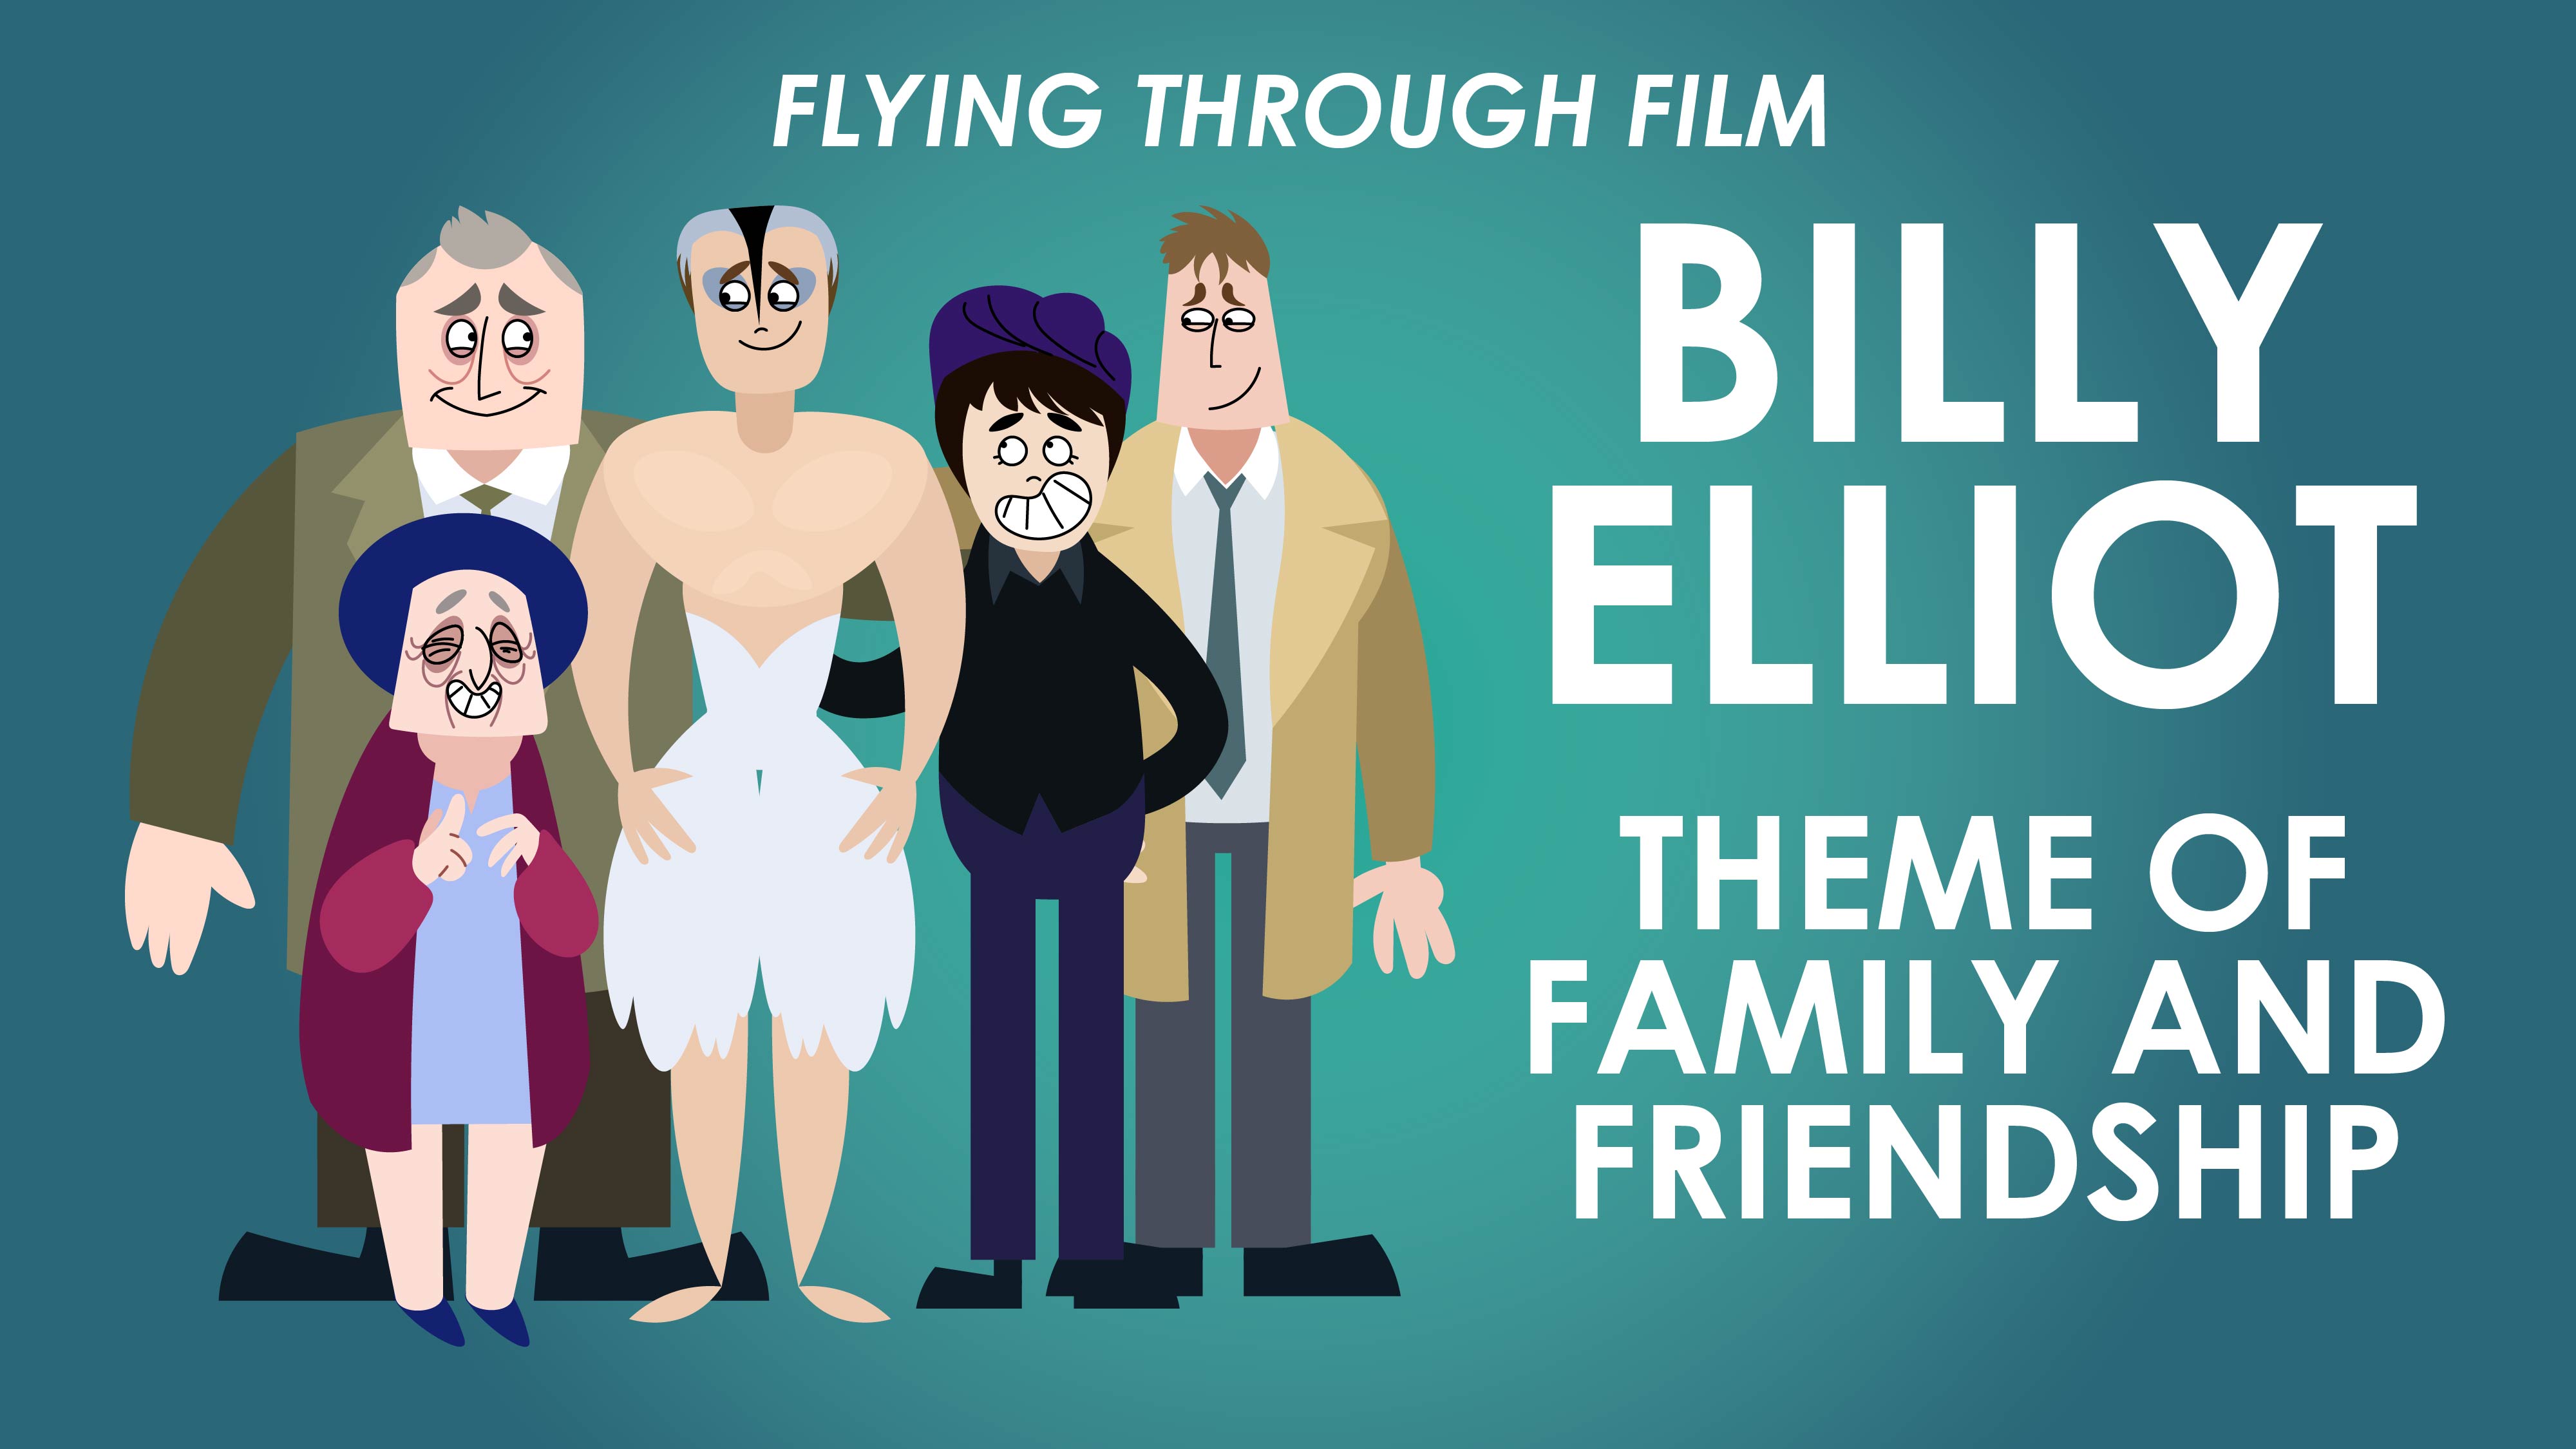 Billy Elliot - Theme Of Family And Friendship - Flying Through Film Series 